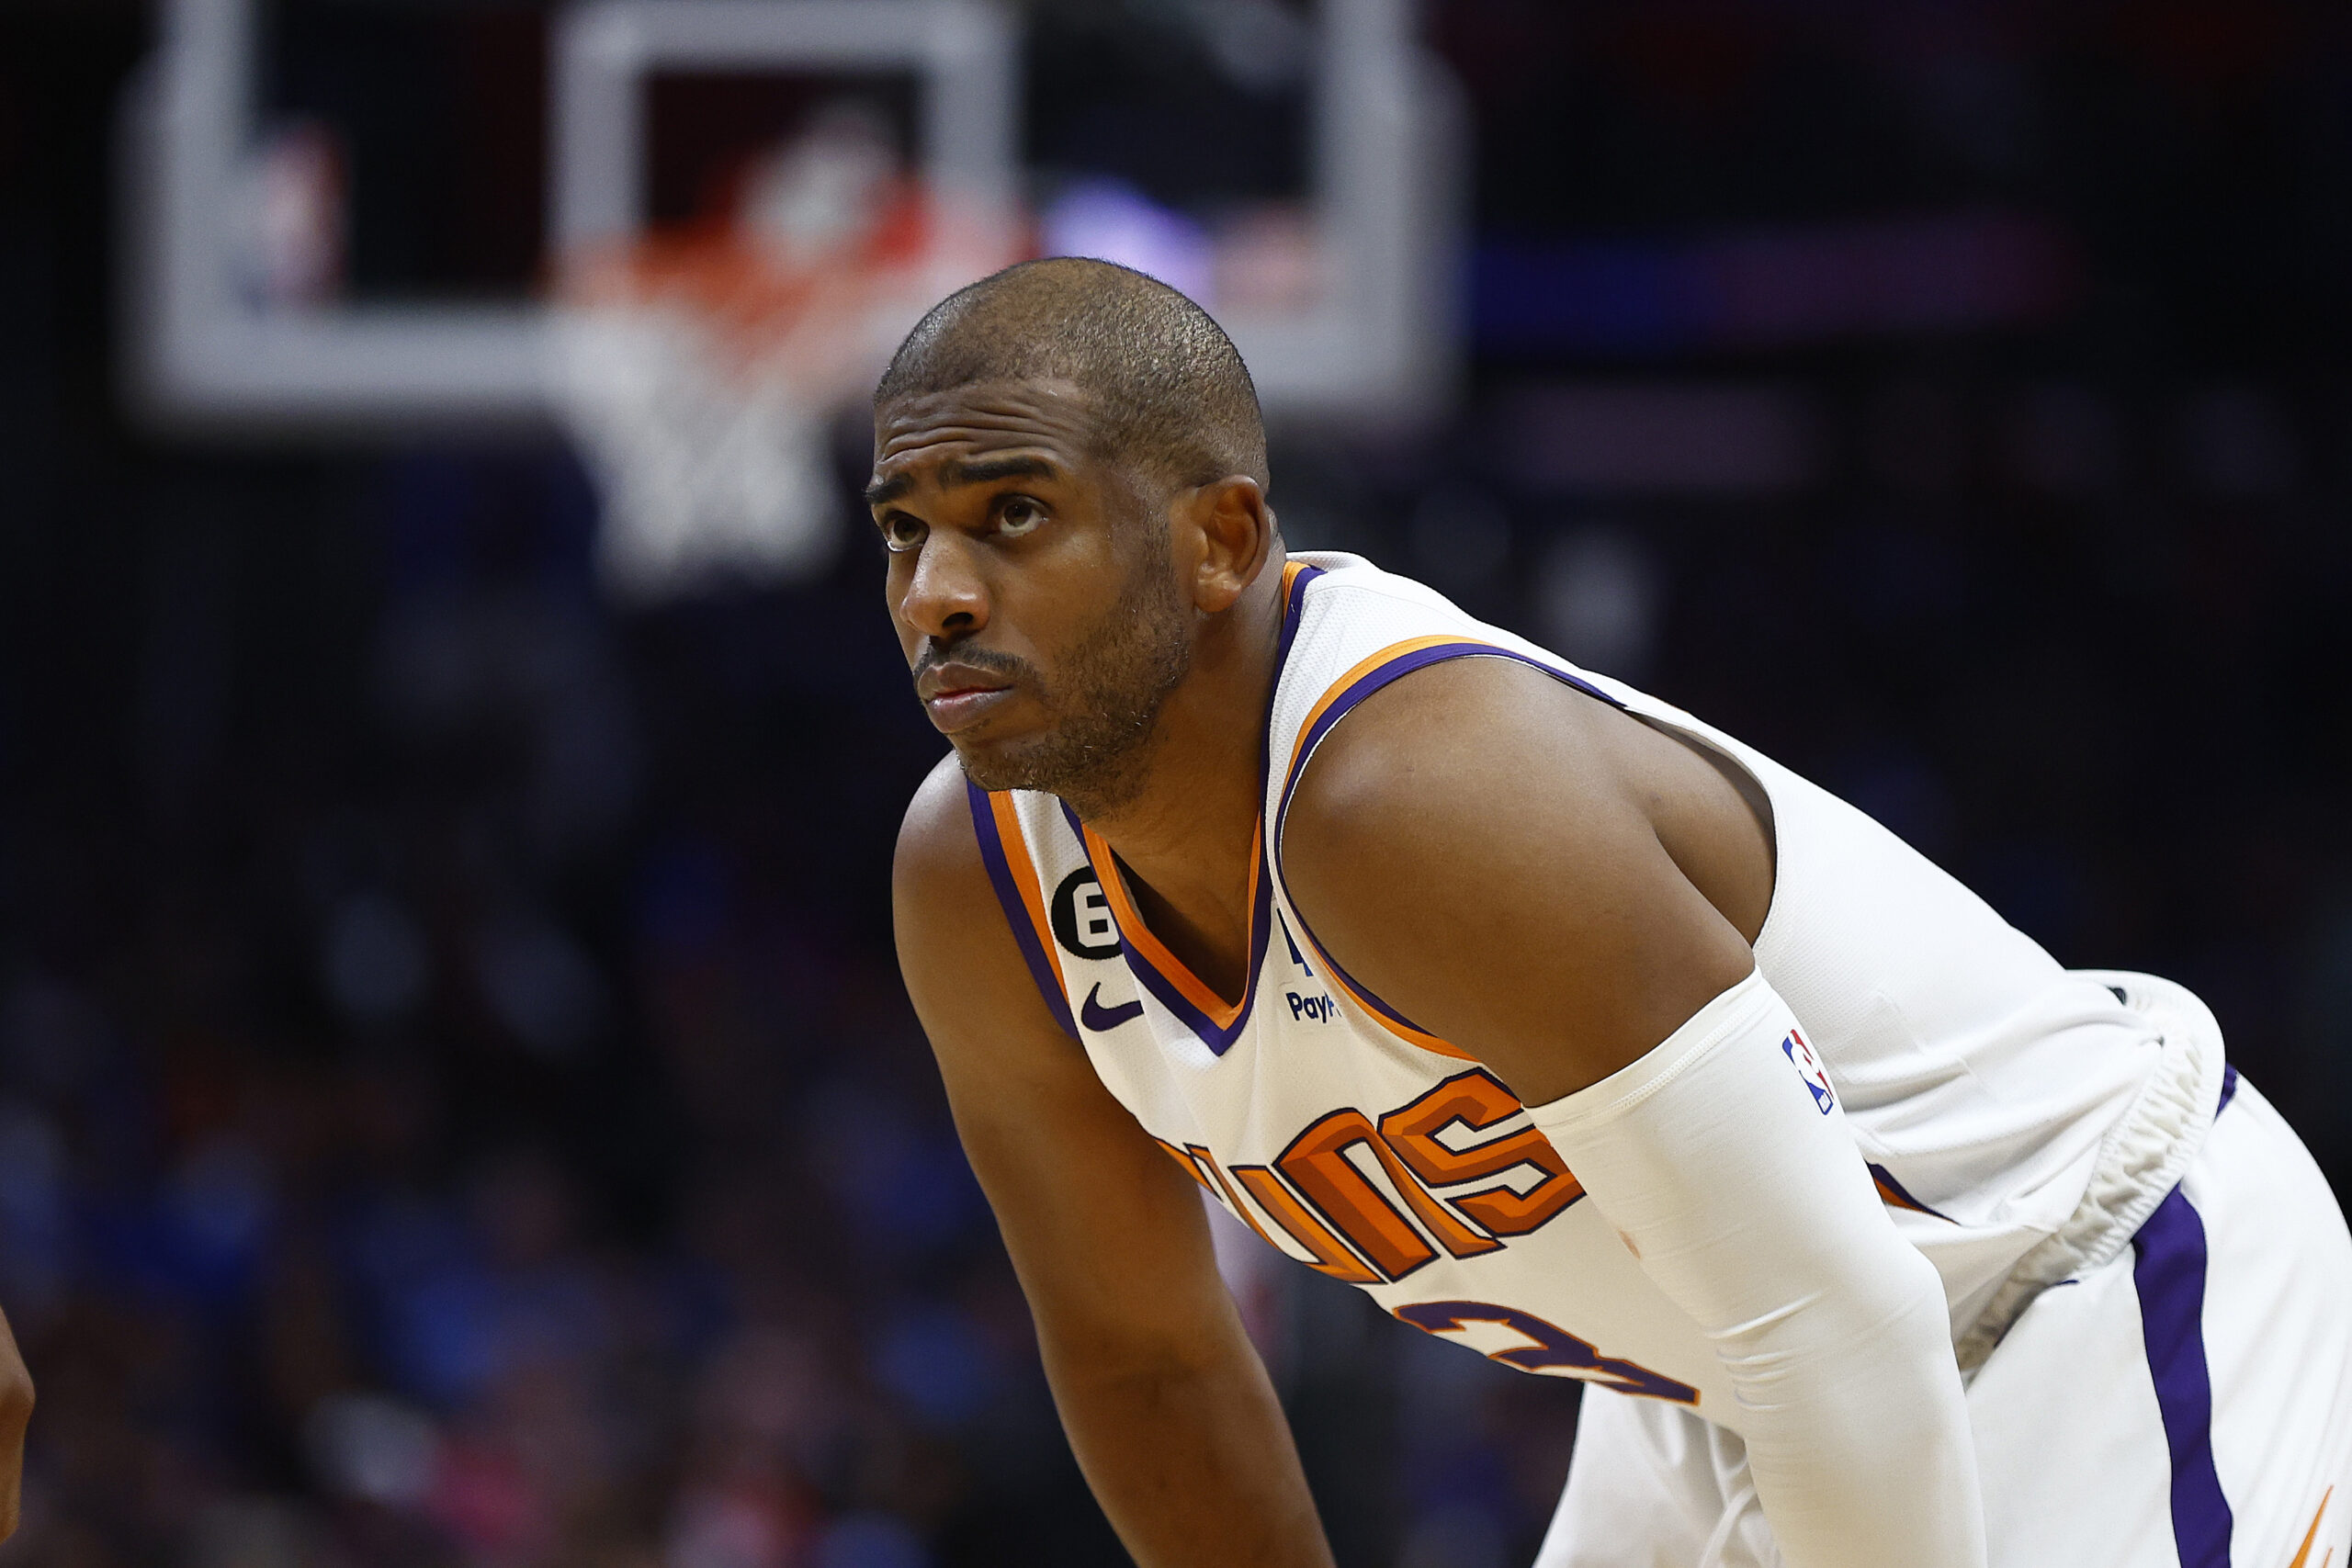 Chris Paul Traded To Warriors For Jordan Poole: Details